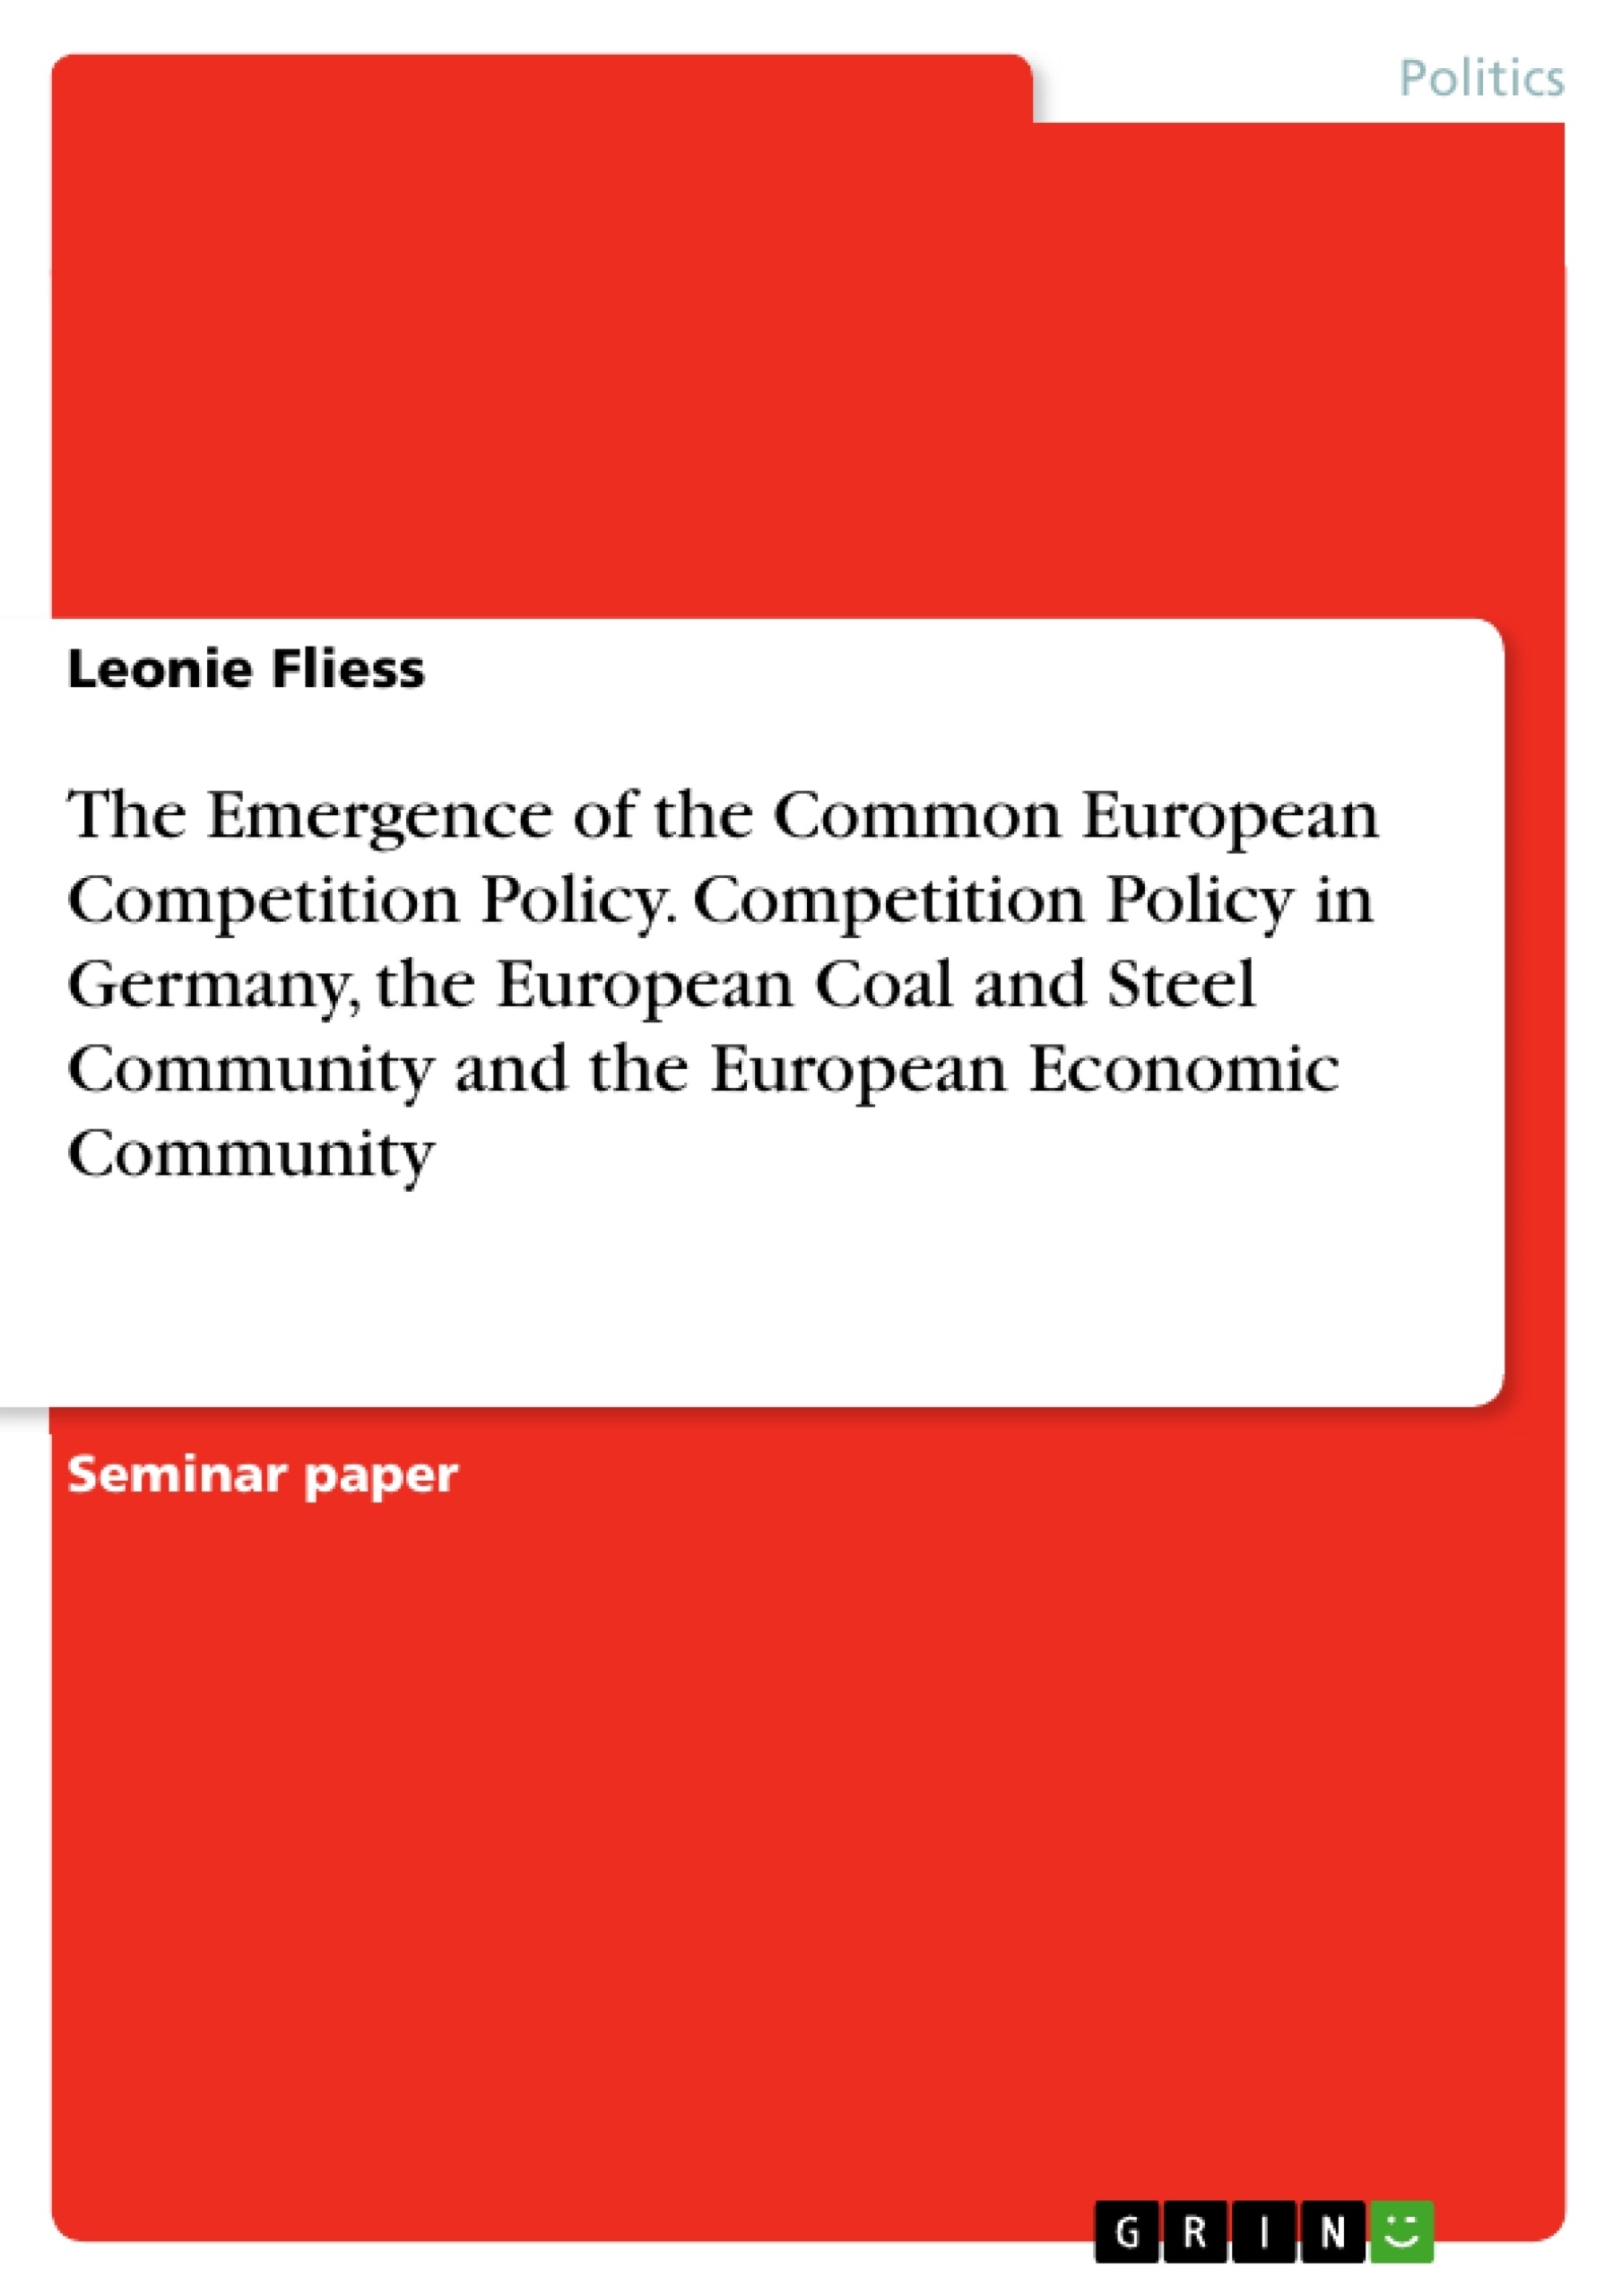 Título: The Emergence of the Common European Competition Policy. Competition Policy in Germany, the European Coal and Steel Community and the European Economic Community